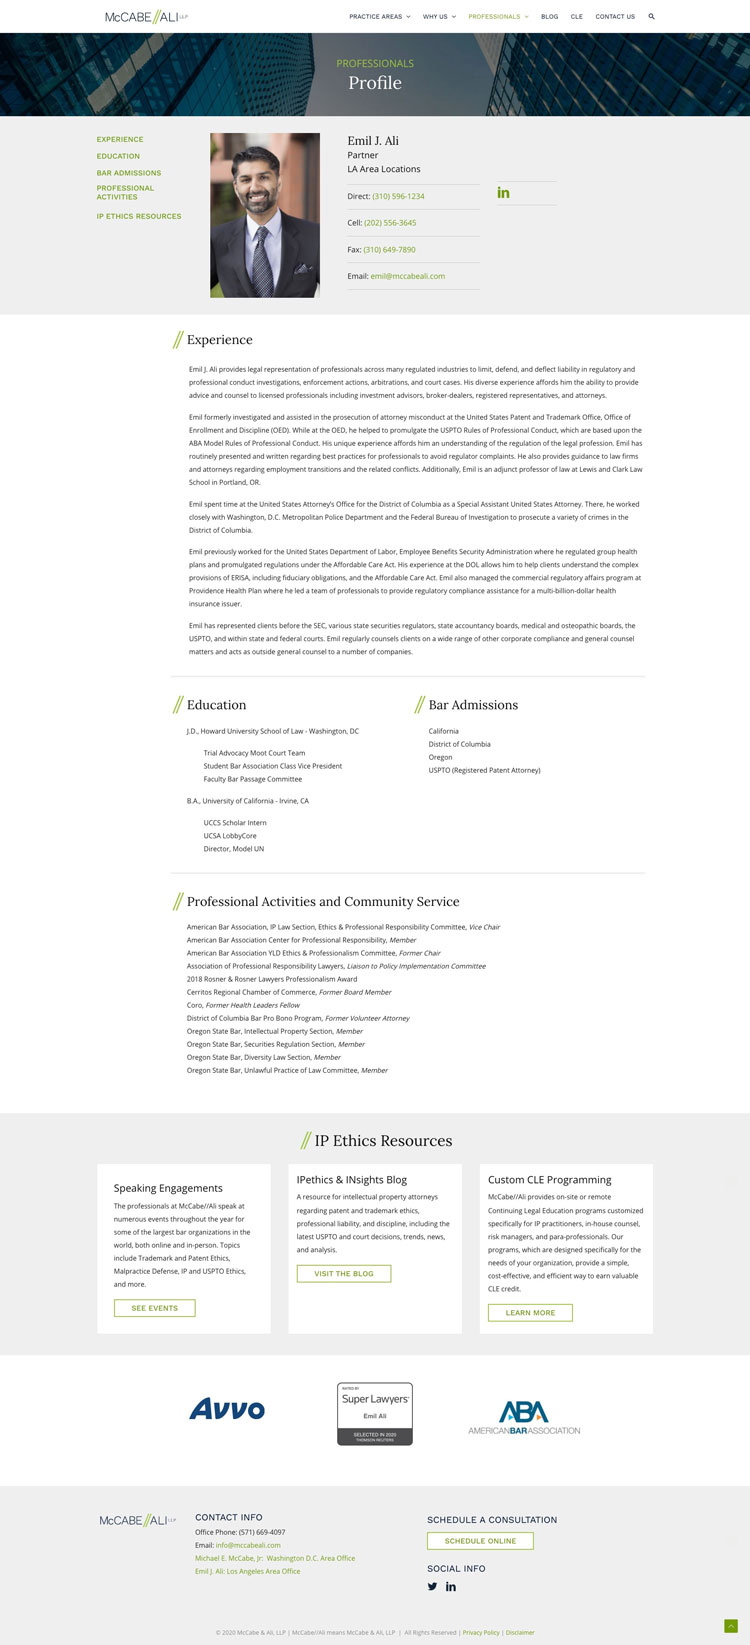 Law Firm Website Design Profile Page